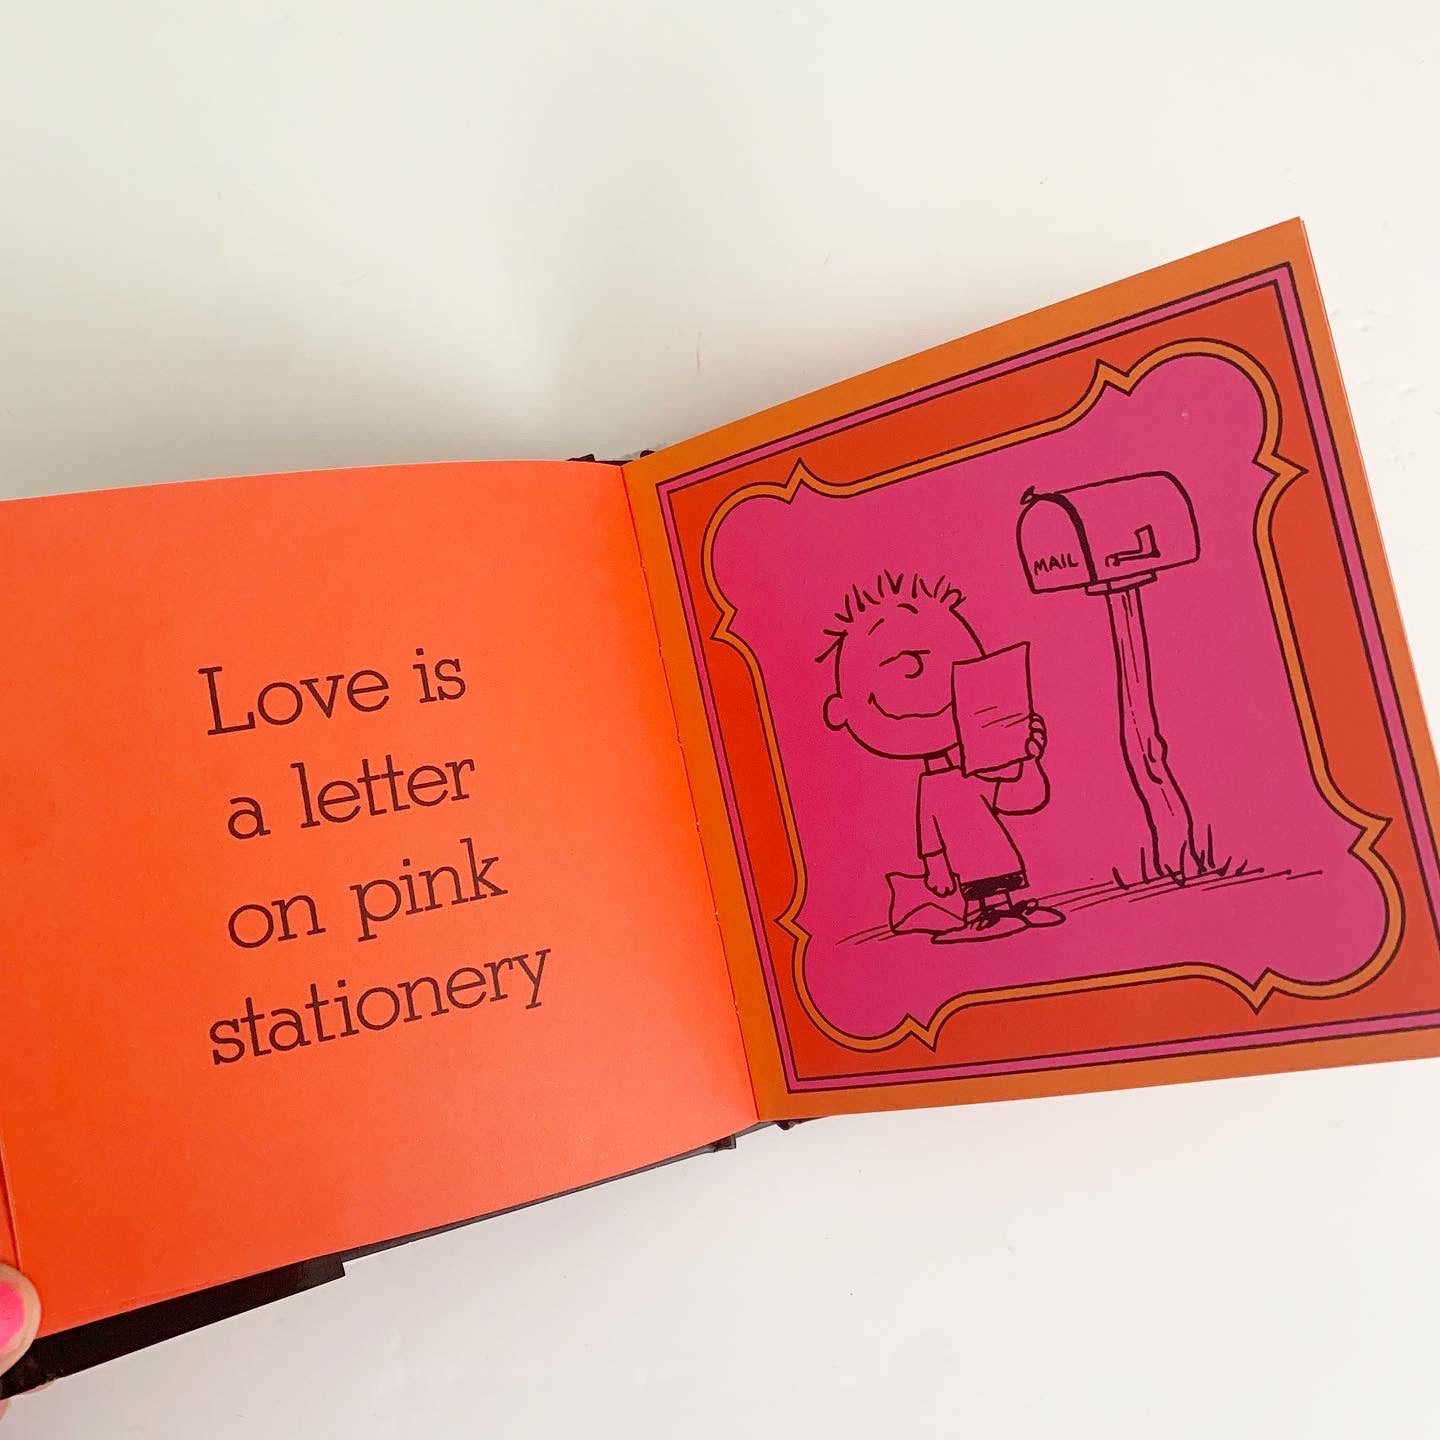 Free with Purchase: Peanuts Love is Walking Hand in Hand Book